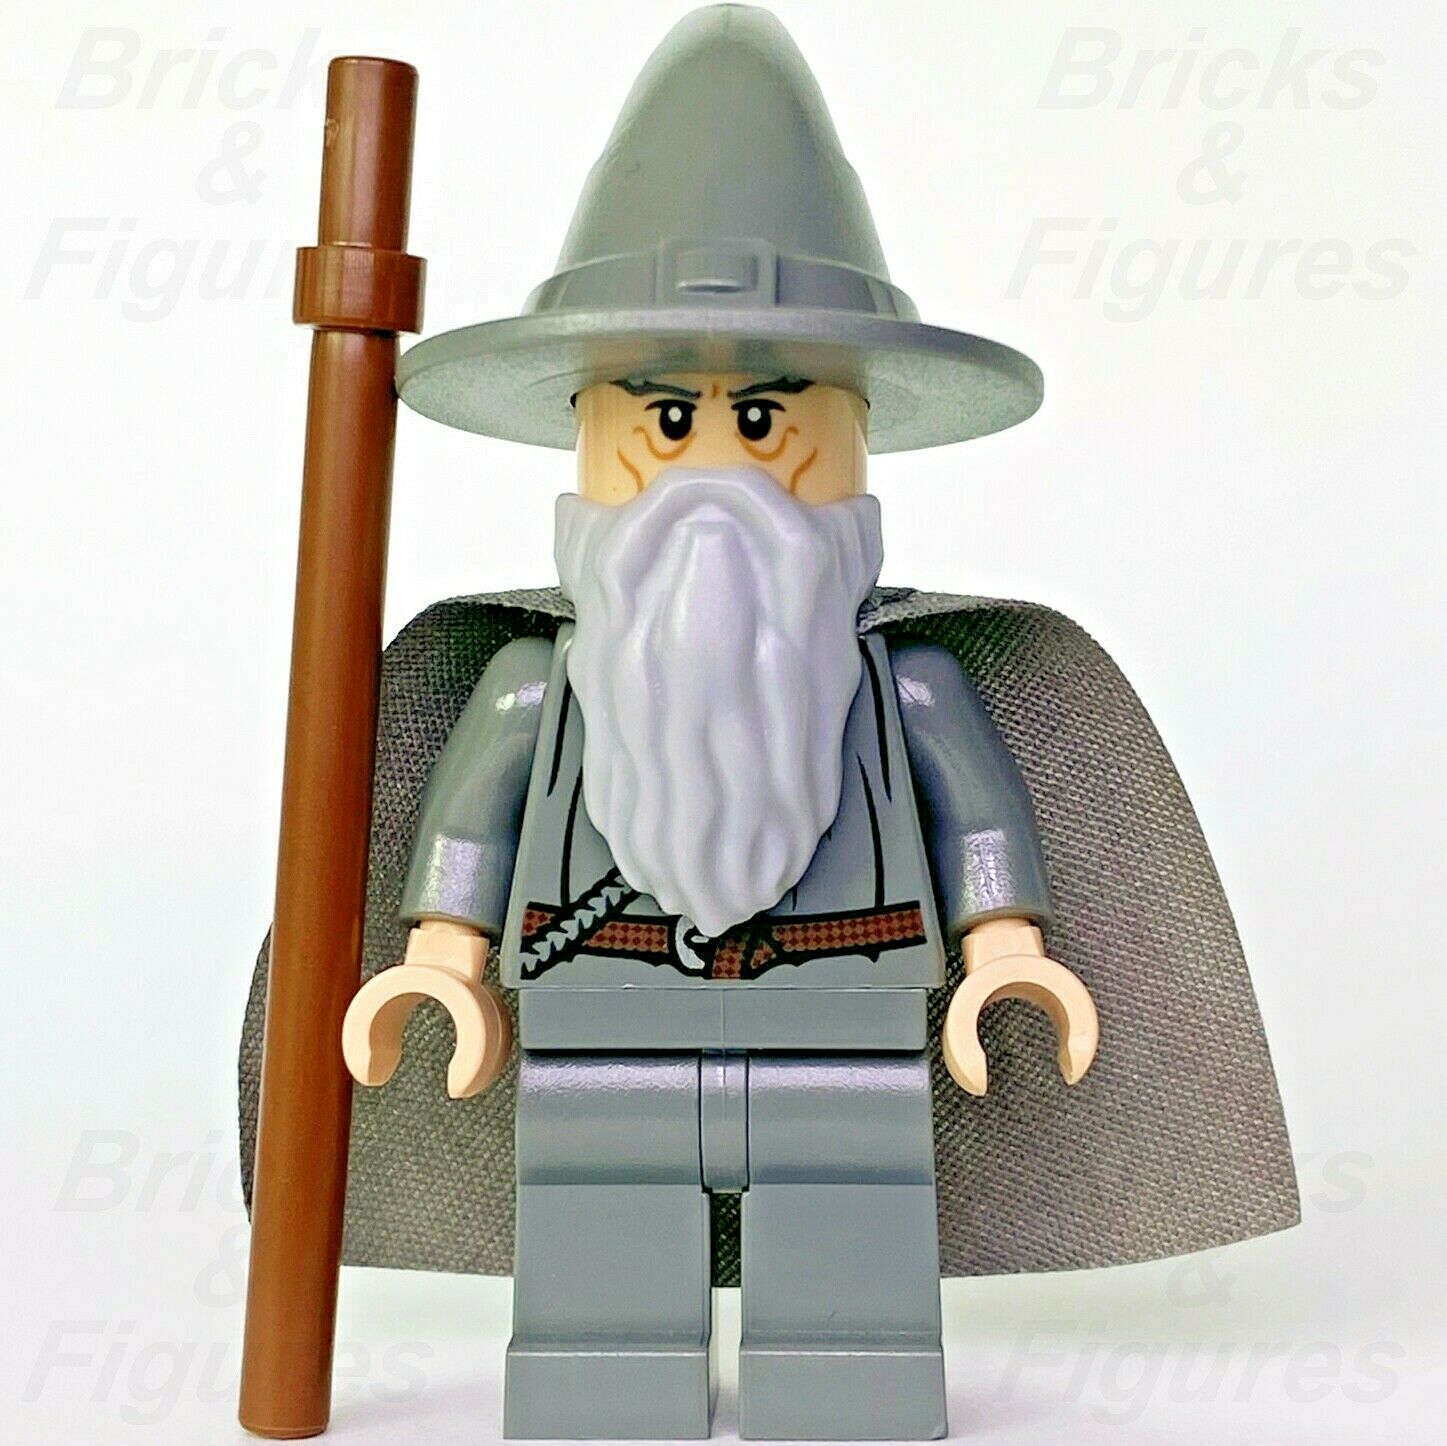 The Lord of the Rings LEGO Gandalf the Grey The Hobbit Minifigure 9469 lor001 - Bricks & Figures